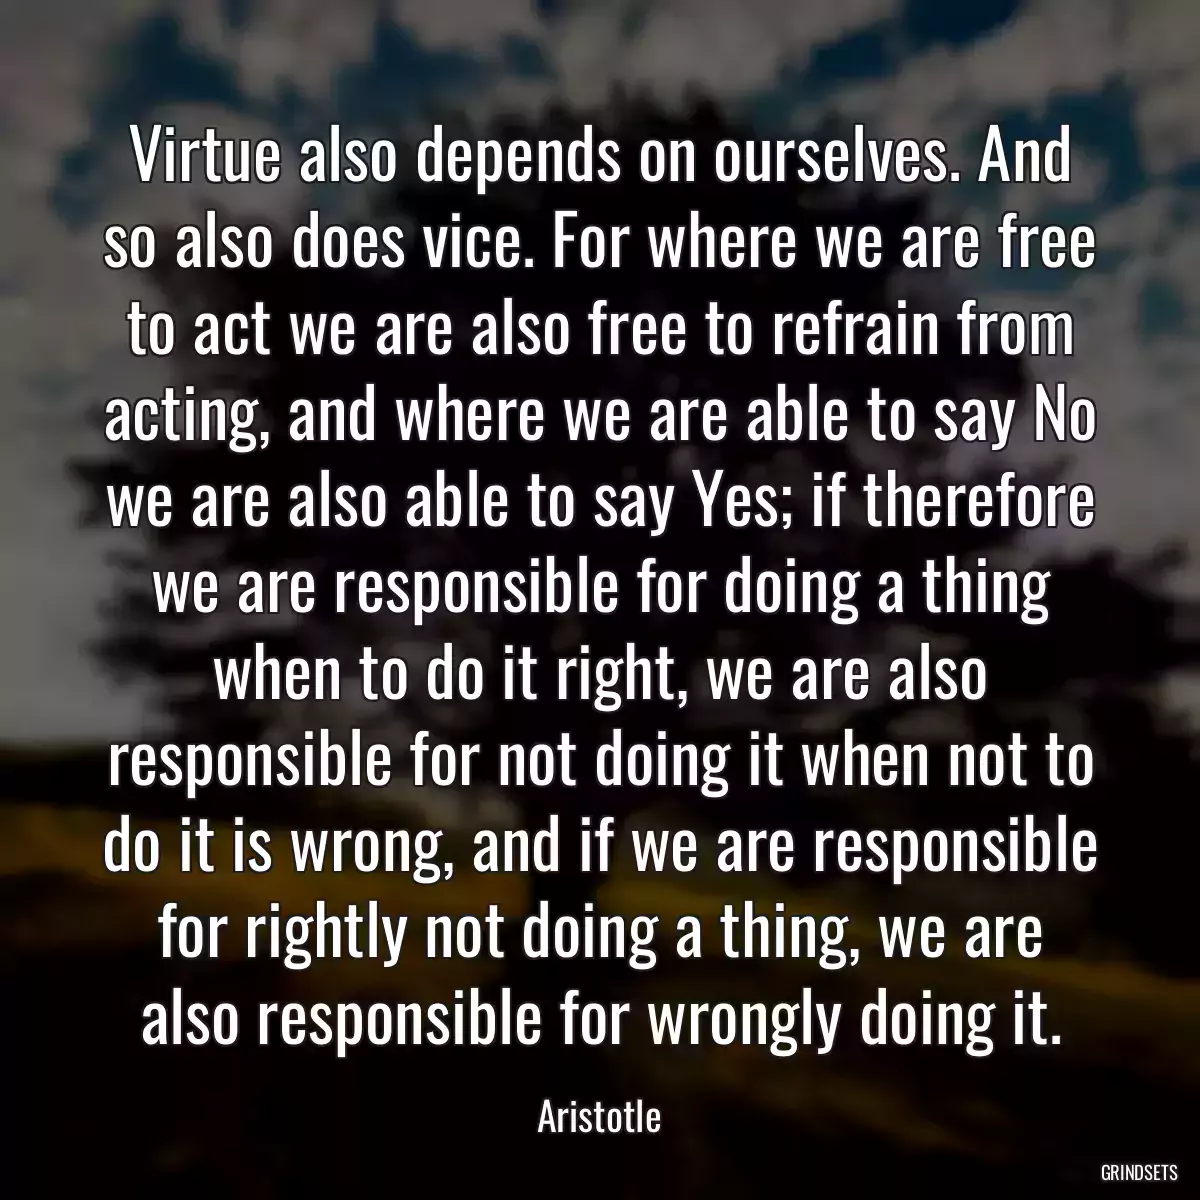 Virtue also depends on ourselves. And so also does vice. For where we are free to act we are also free to refrain from acting, and where we are able to say No we are also able to say Yes; if therefore we are responsible for doing a thing when to do it right, we are also responsible for not doing it when not to do it is wrong, and if we are responsible for rightly not doing a thing, we are also responsible for wrongly doing it.